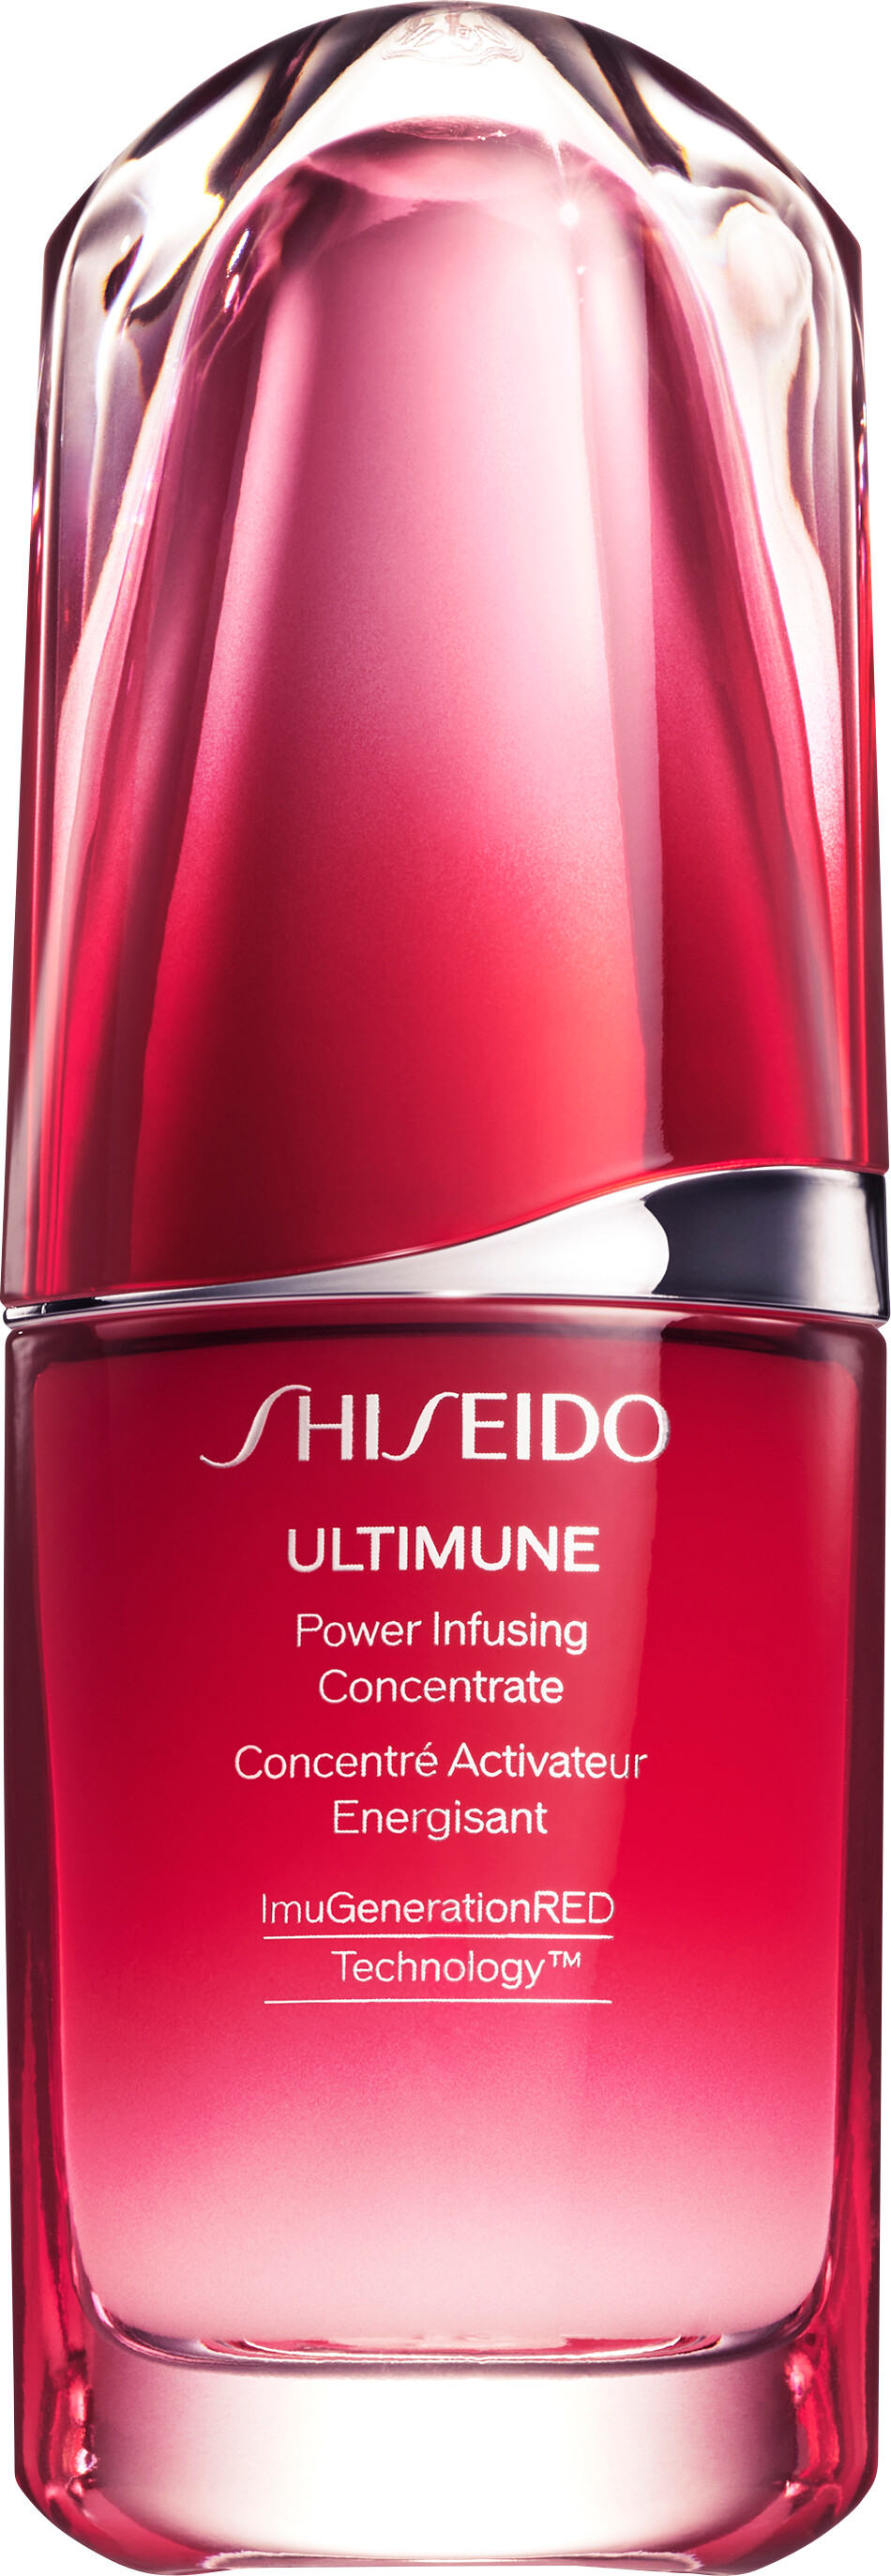 Shiseido Ultimune Power Infusing Concentrate with ImuGenerationRED Technology 3.0 30ml